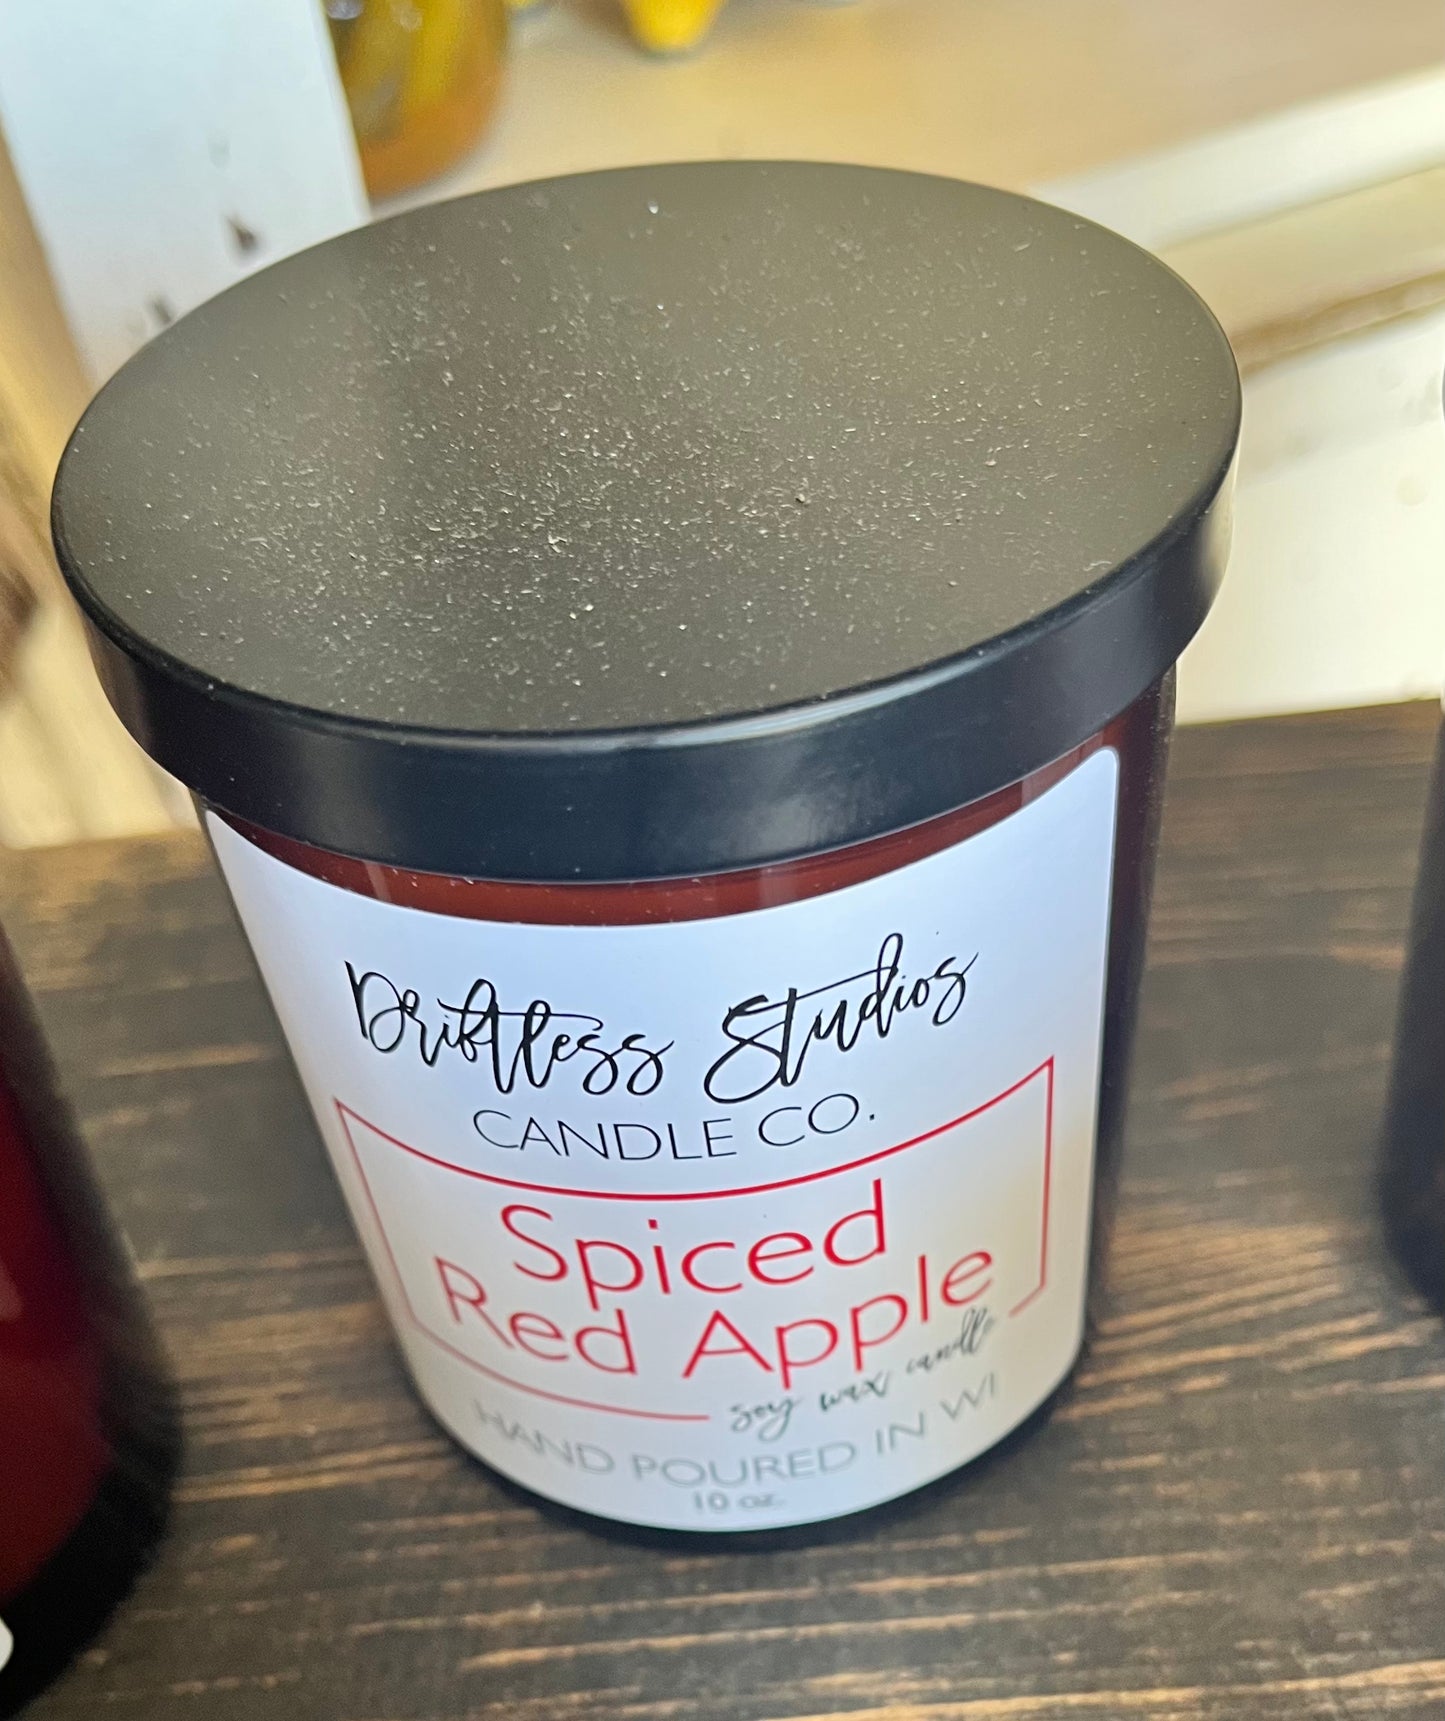 Driftless Studios Candle Co